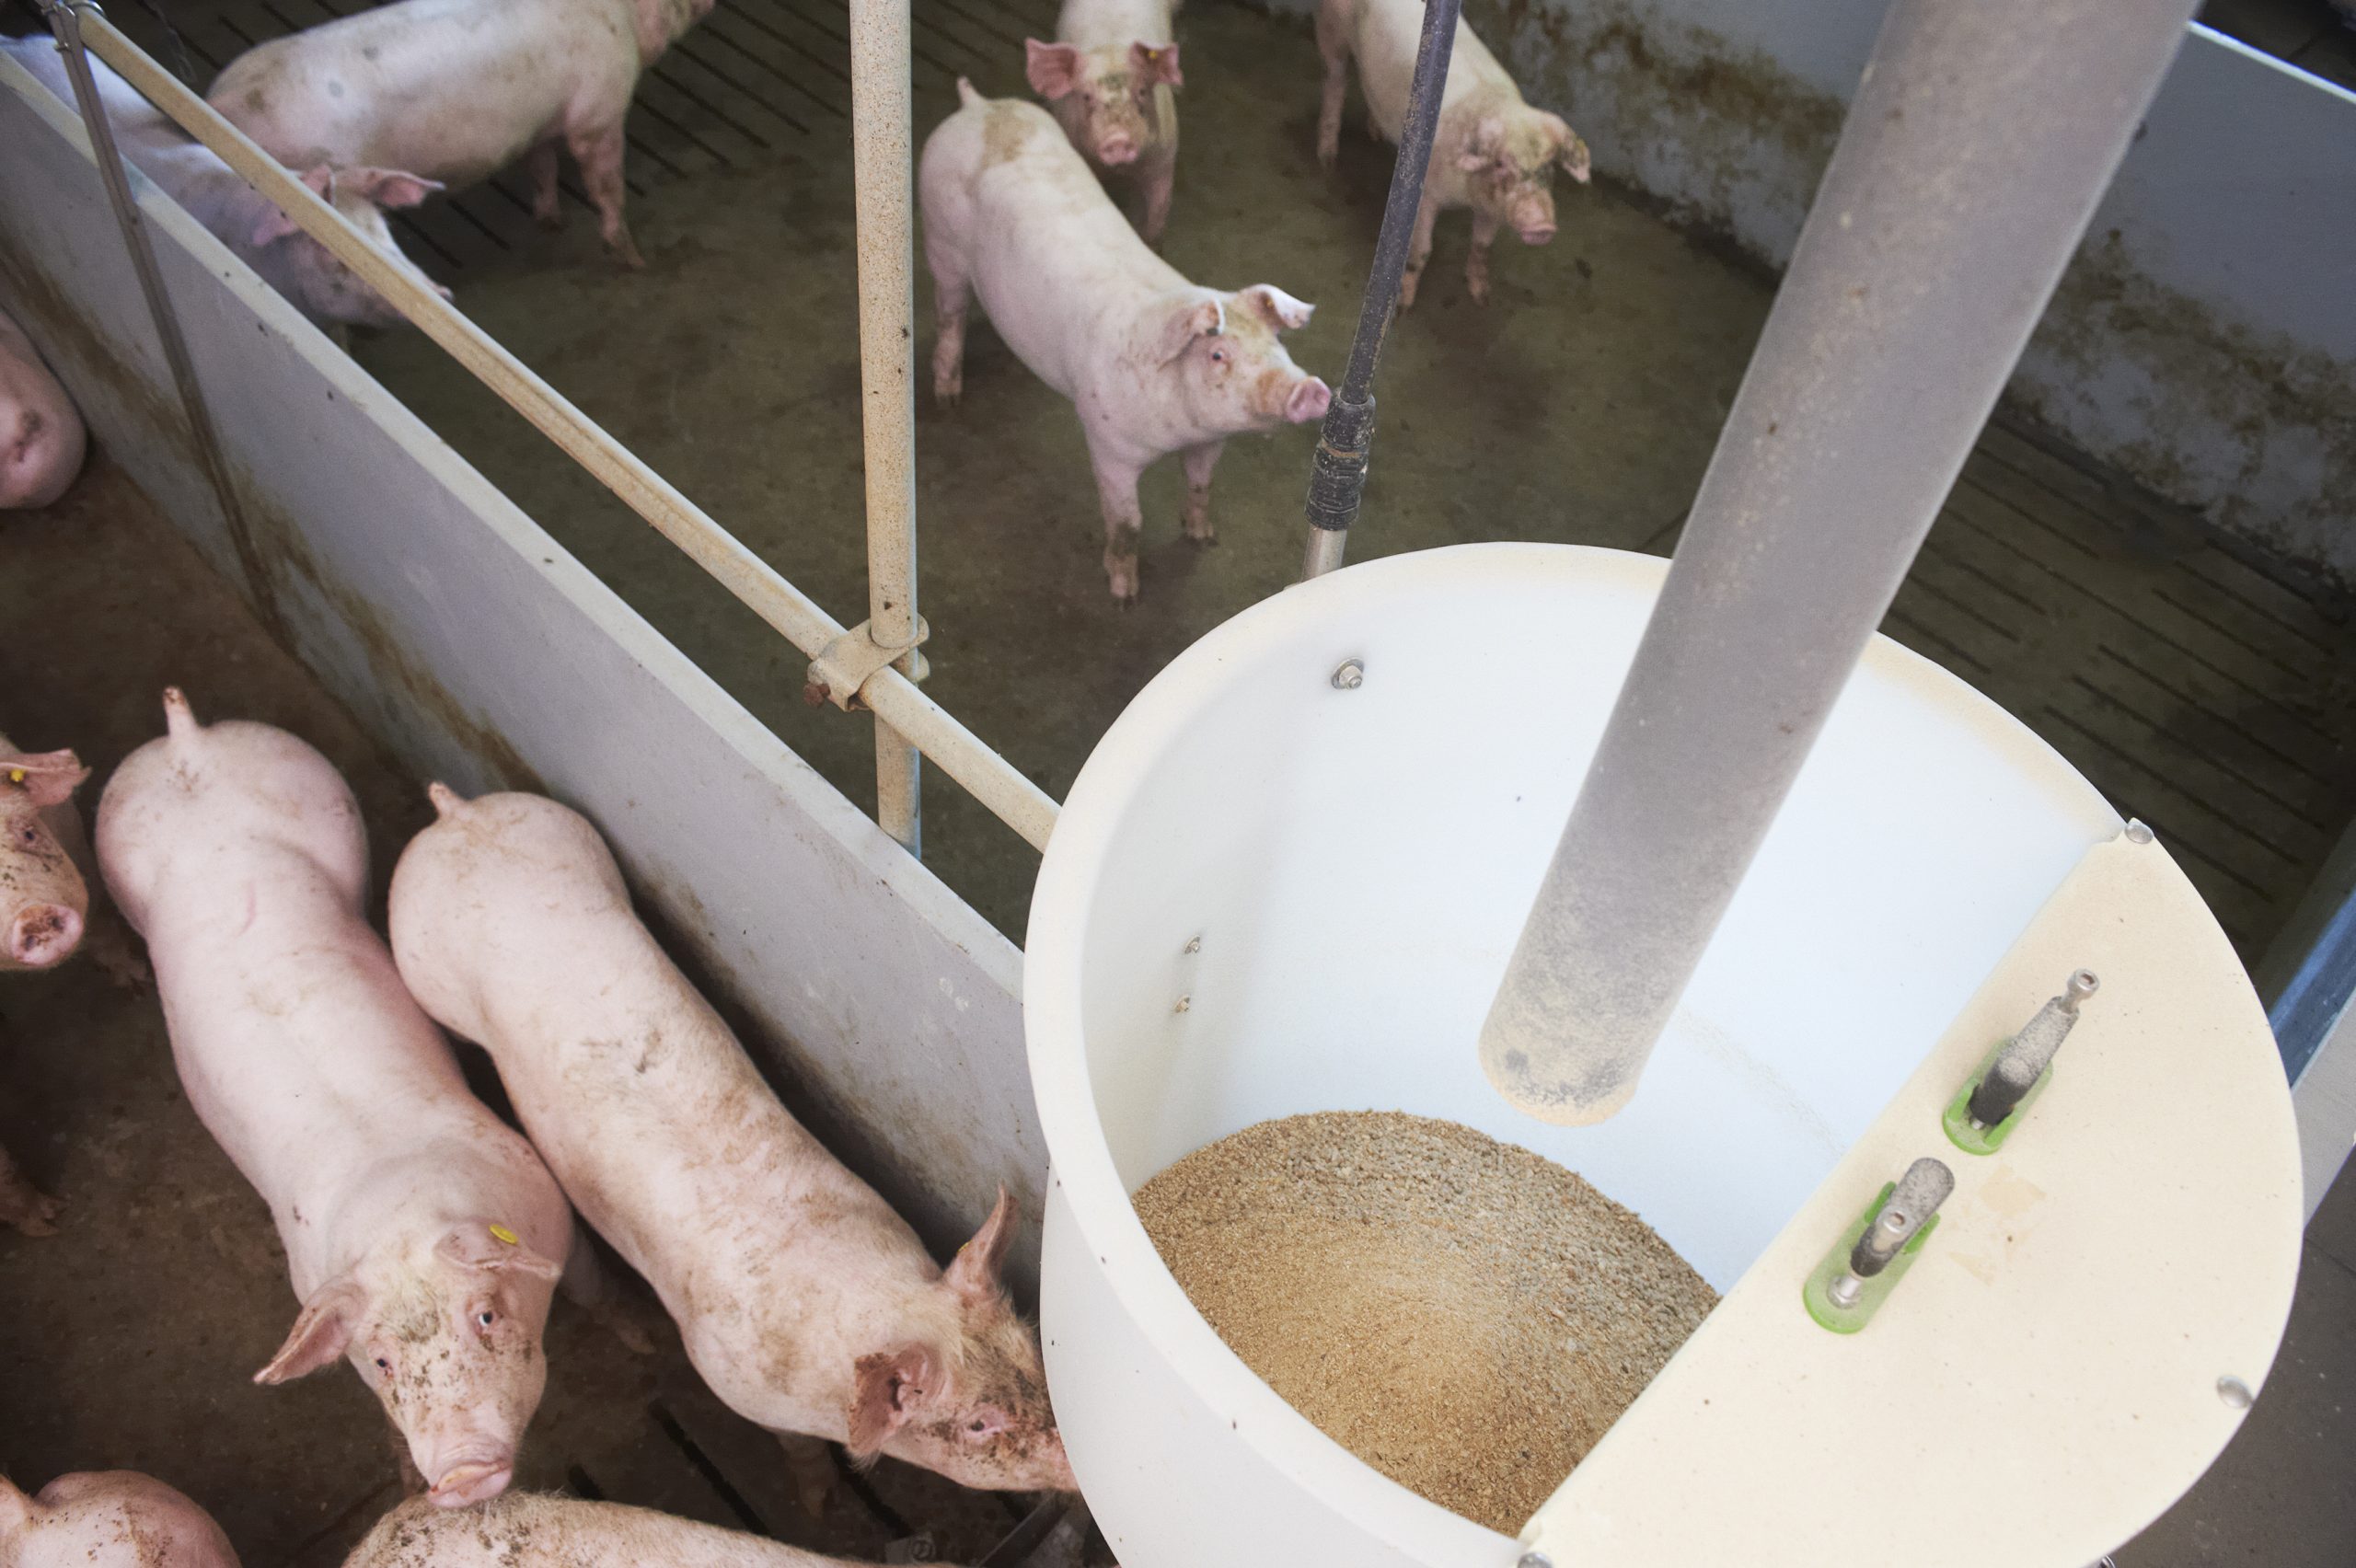 When contaminated feed is consumed, pathogenic microorganisms can be transferred to the animals, hence leading to diseases or supressed performance. Photo: Van Assendelft Fotografie